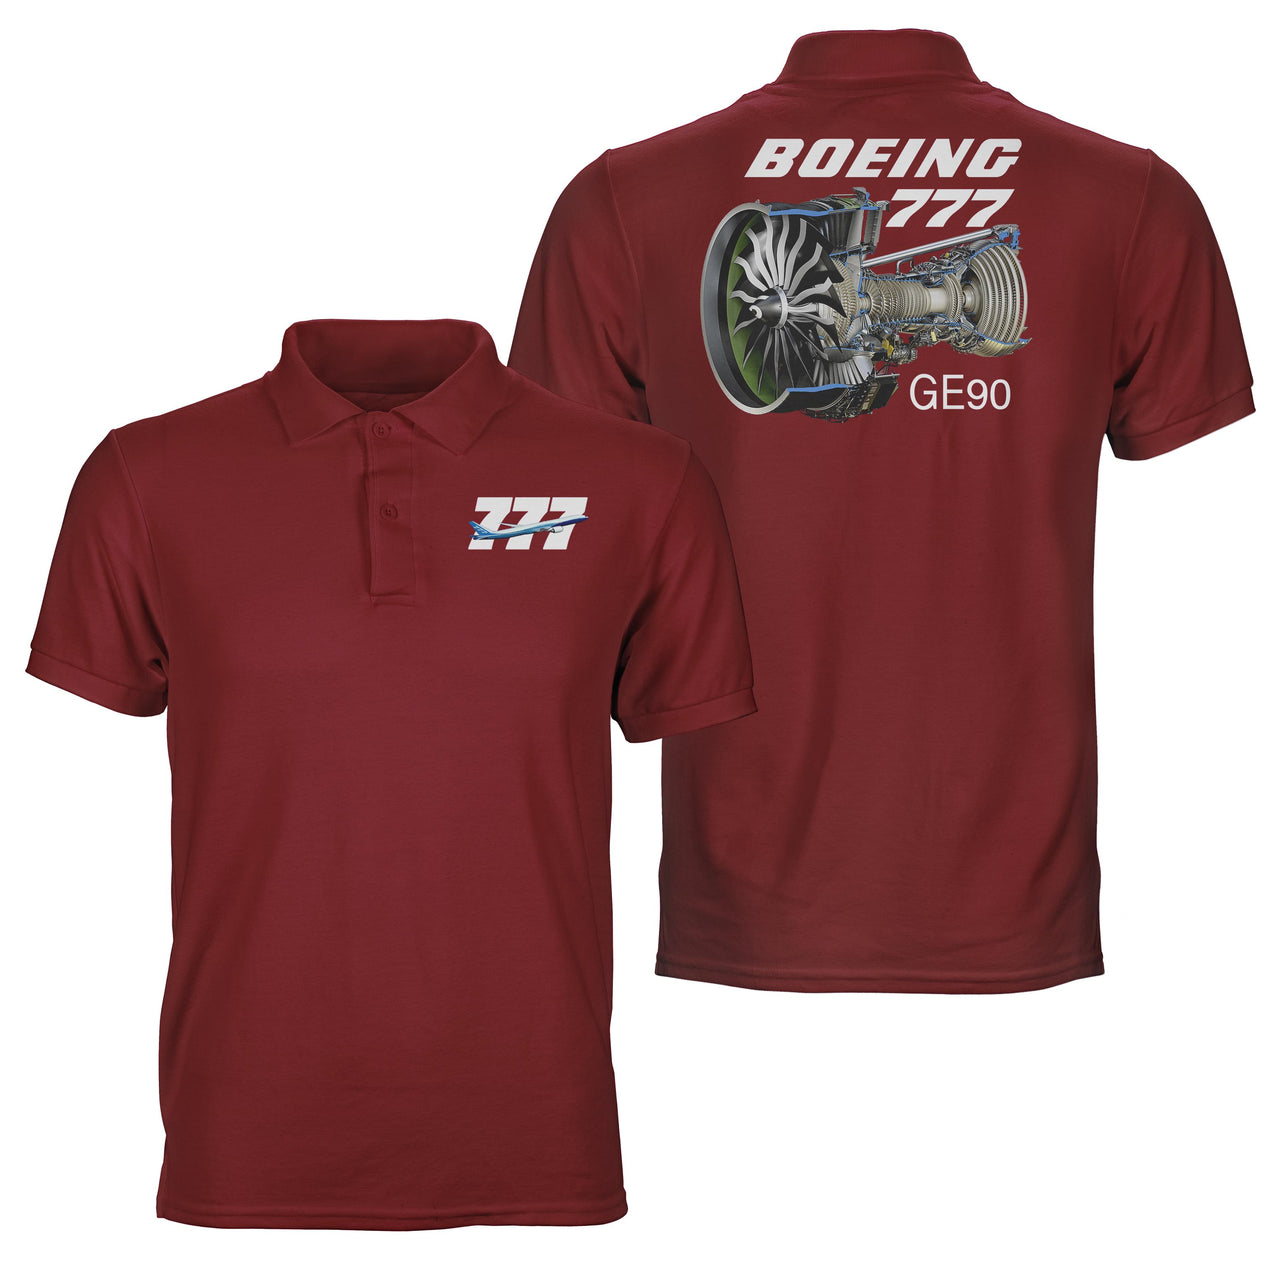 Boeing 777 & GE90 Engine Designed Double Side Polo T-Shirts